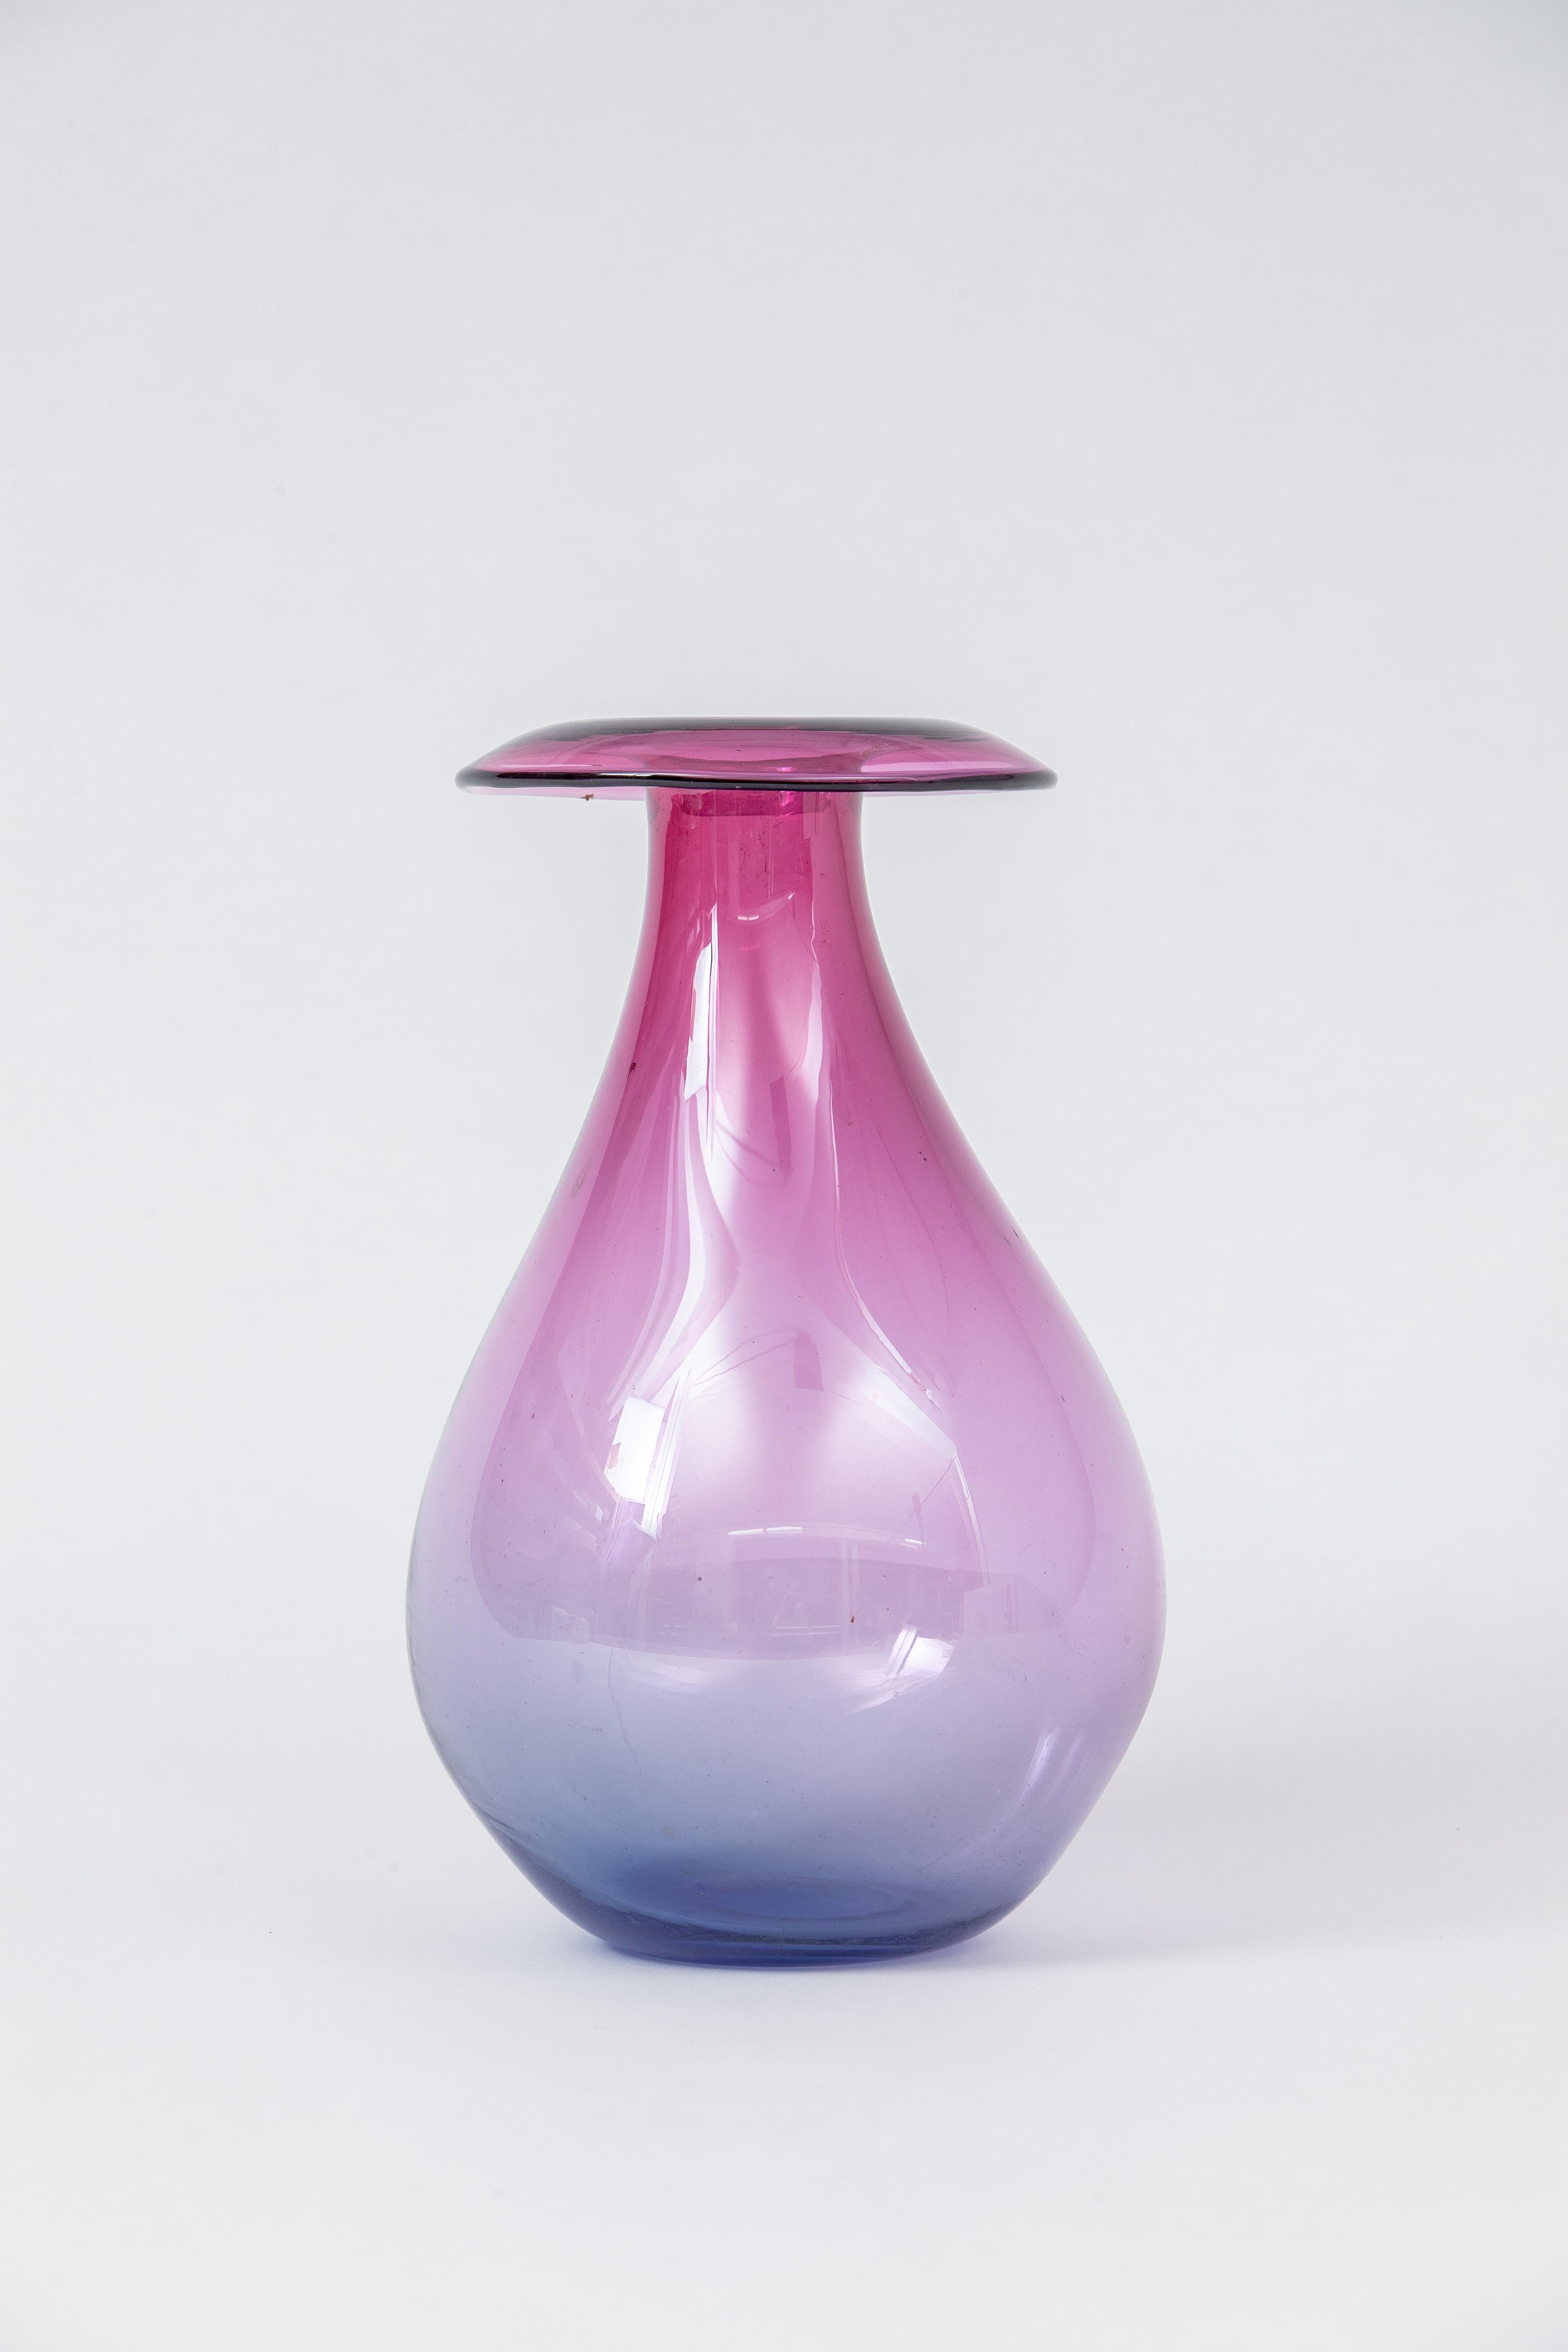 A large murano blown glass vase with a gradient of shades of purples and blues. It is very delicate with a fairly sized neck and lip, and it would make an elegant object or bud vase.